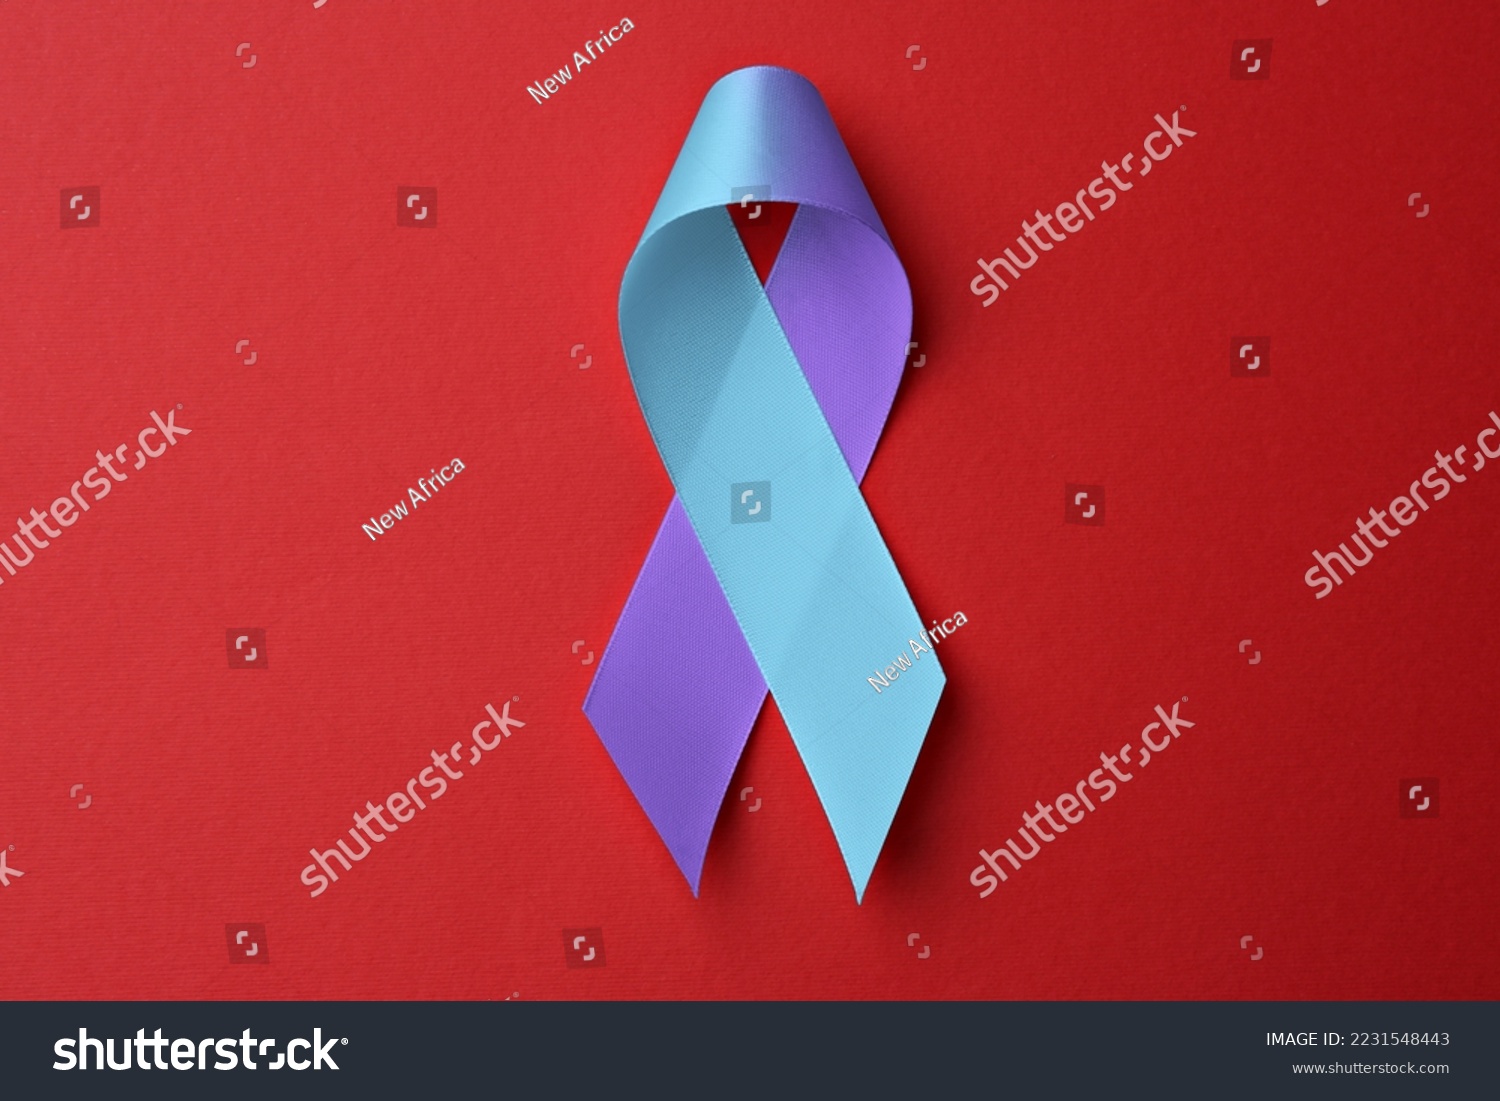 World Arthritis Day. Blue and purple awareness ribbon on red background, top view #2231548443